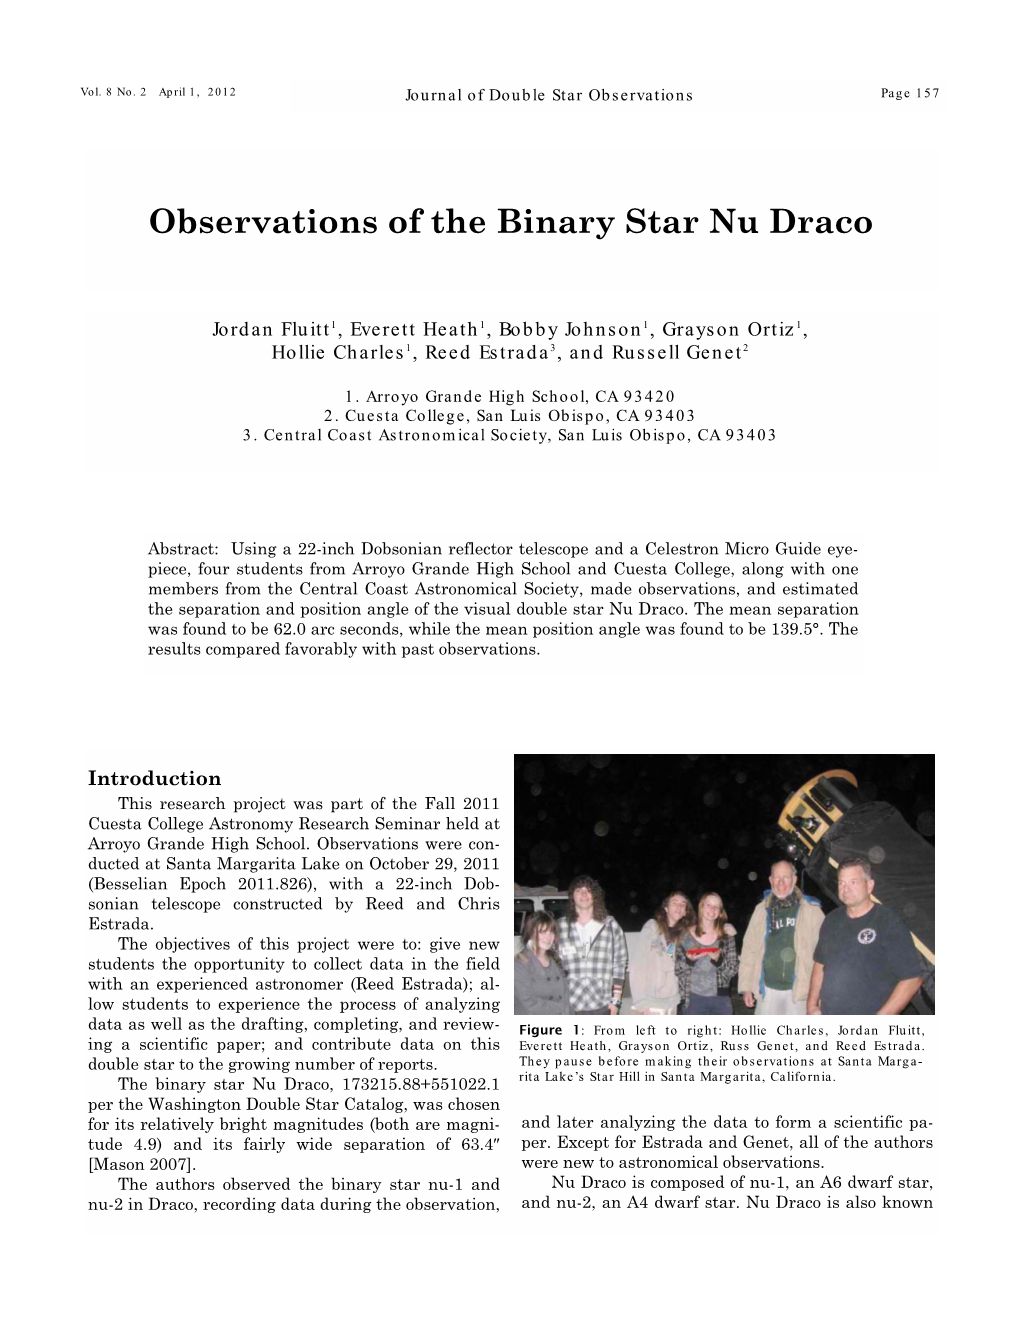 Observations of the Binary Star Nu Draco